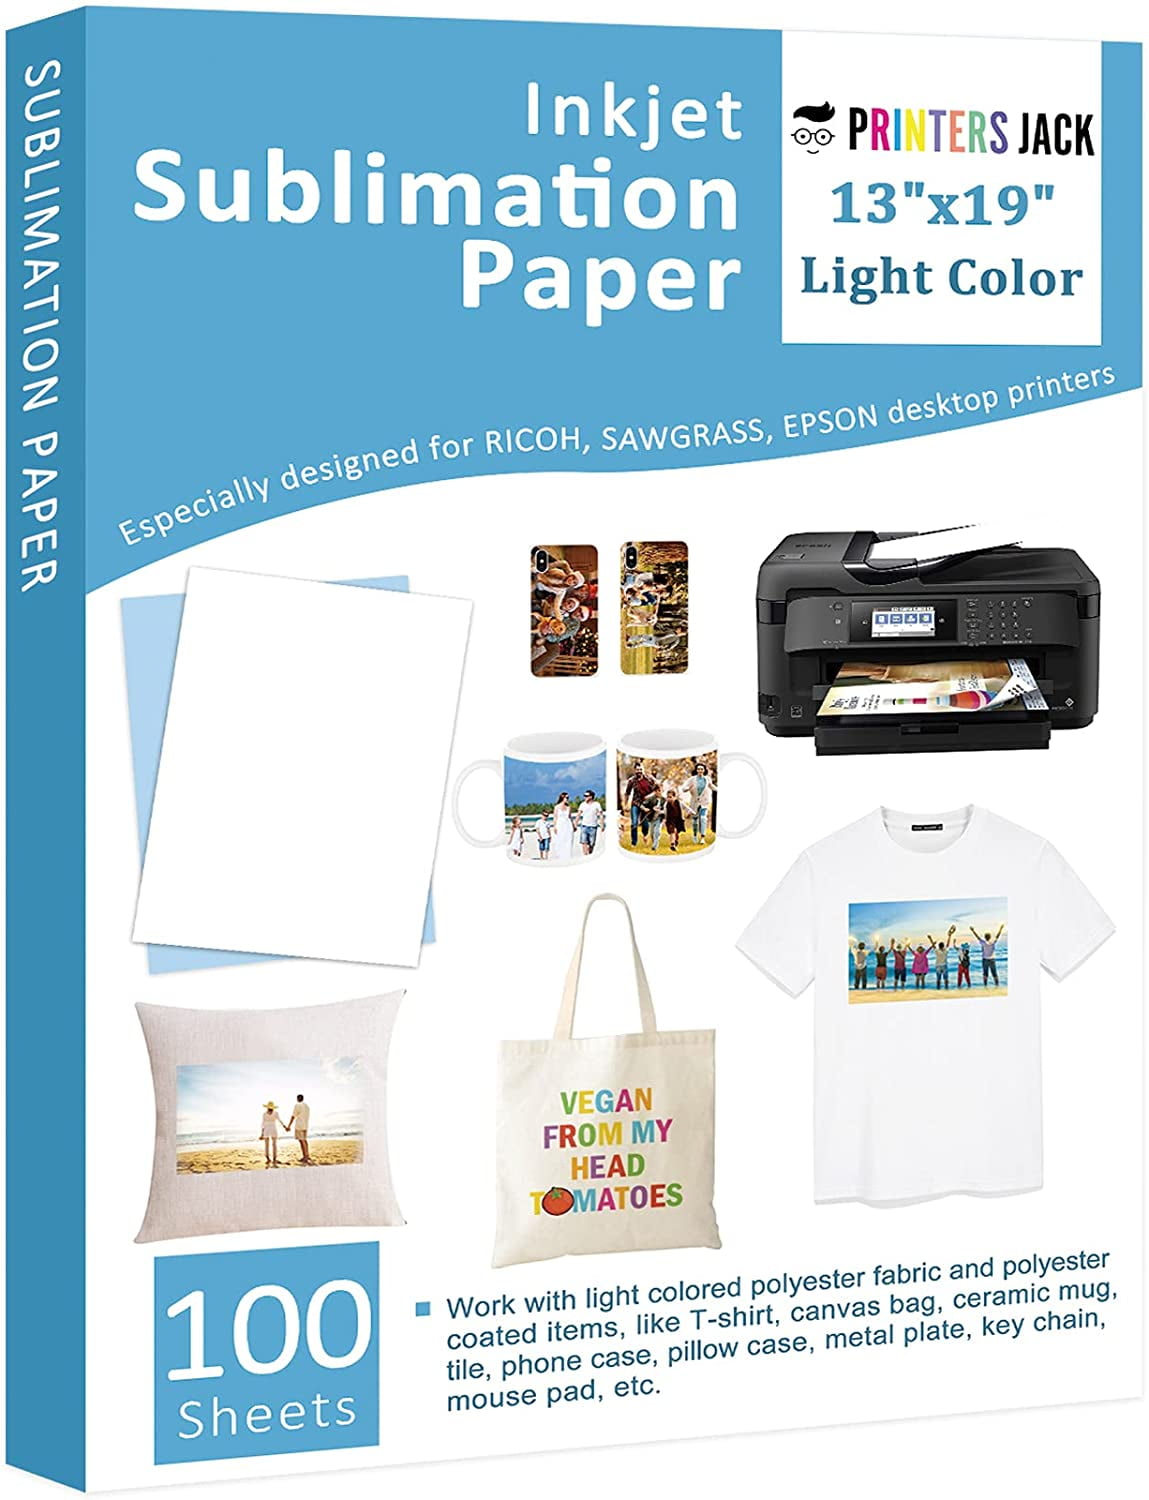 Printers Jack SZKPSZG Sublimation Paper Heat Transfer Paper 100 Sheets 8.3  x 11.7 for Any Epson HP Canon Sawgrass Inkjet Printer with Sublimation